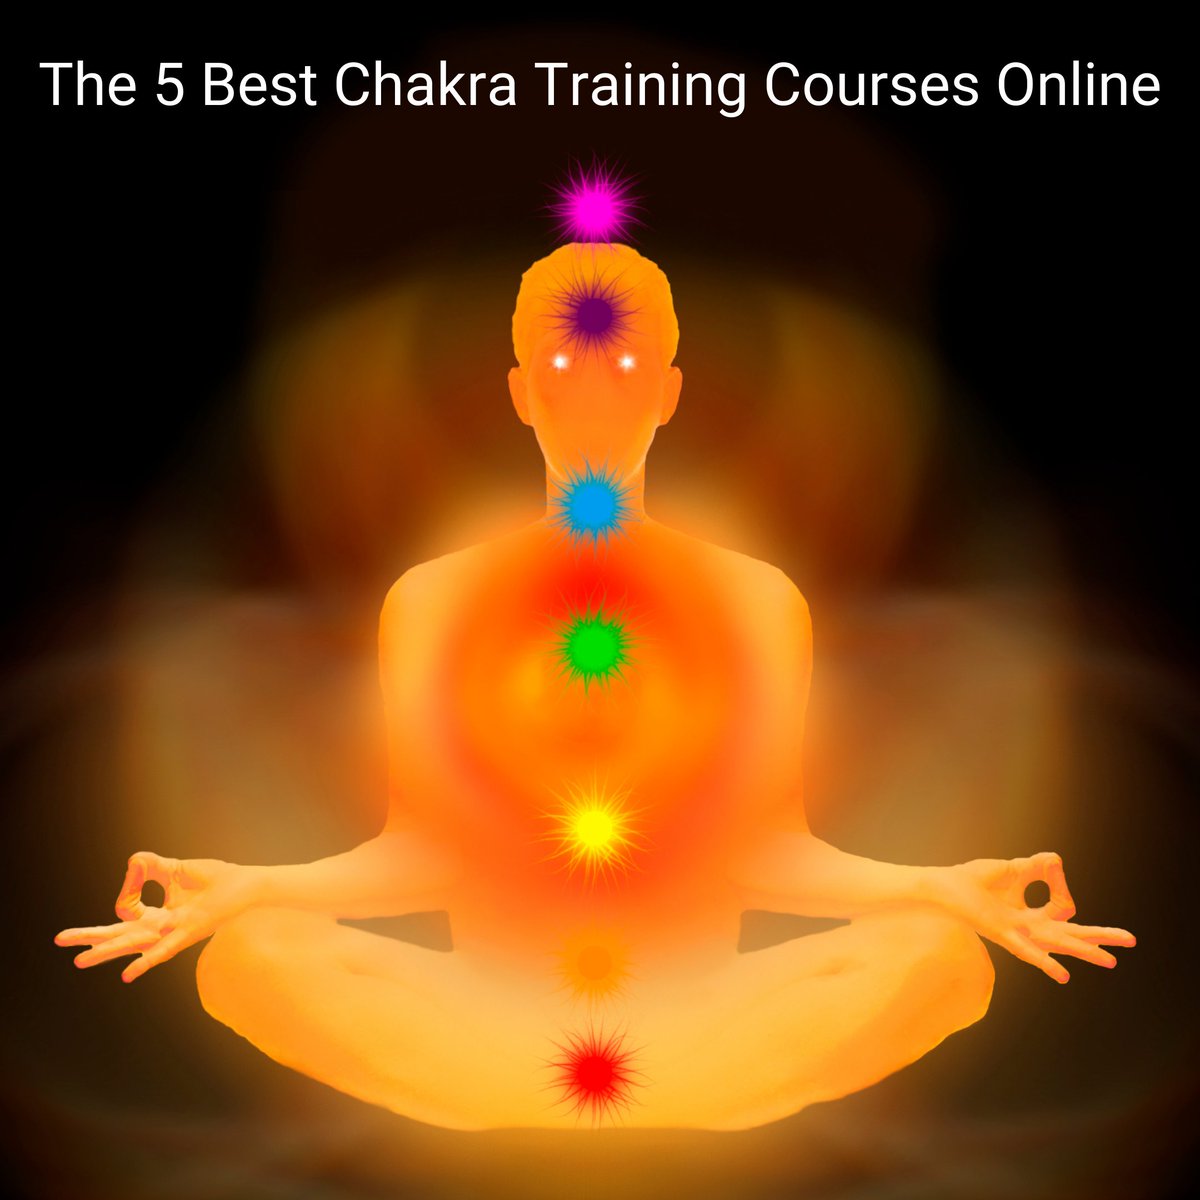 🧘✨

➡️ Check out the link provided to learn about 'The 5 Best Chakra Training Courses Online'

l8r.it/Vb3m

#MITM #mindisthemaster #masteringourmind #yoga #mindfulness #meditate #spiritual #healing #yogi #wellness #namaste #chakrayoga #onlineyoga #yogatraining